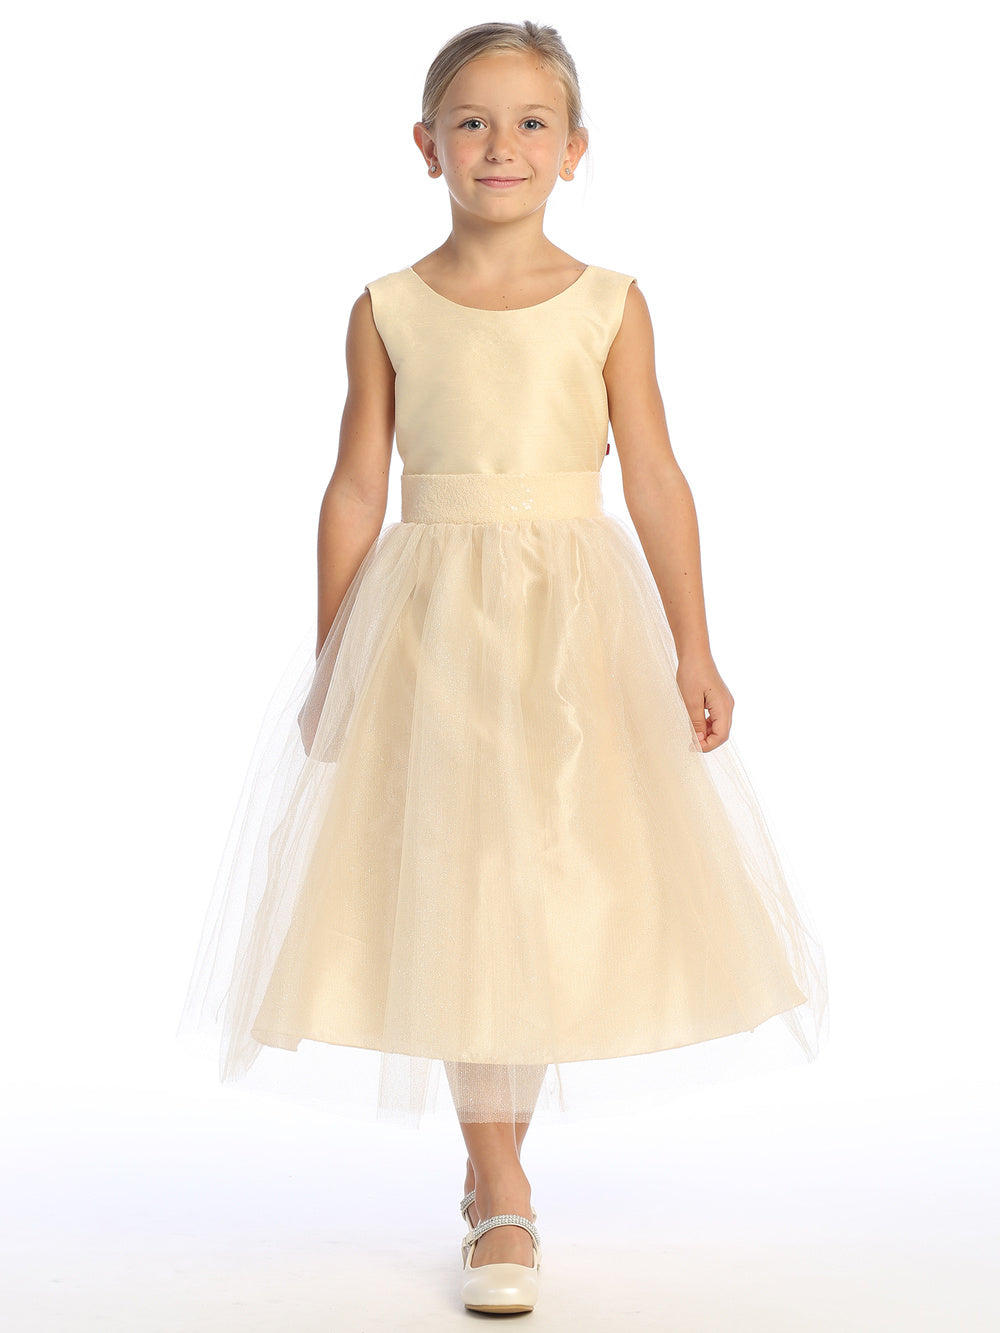 Flower girl glistens in champagne shantung dress with sequins and sparkle tulle.